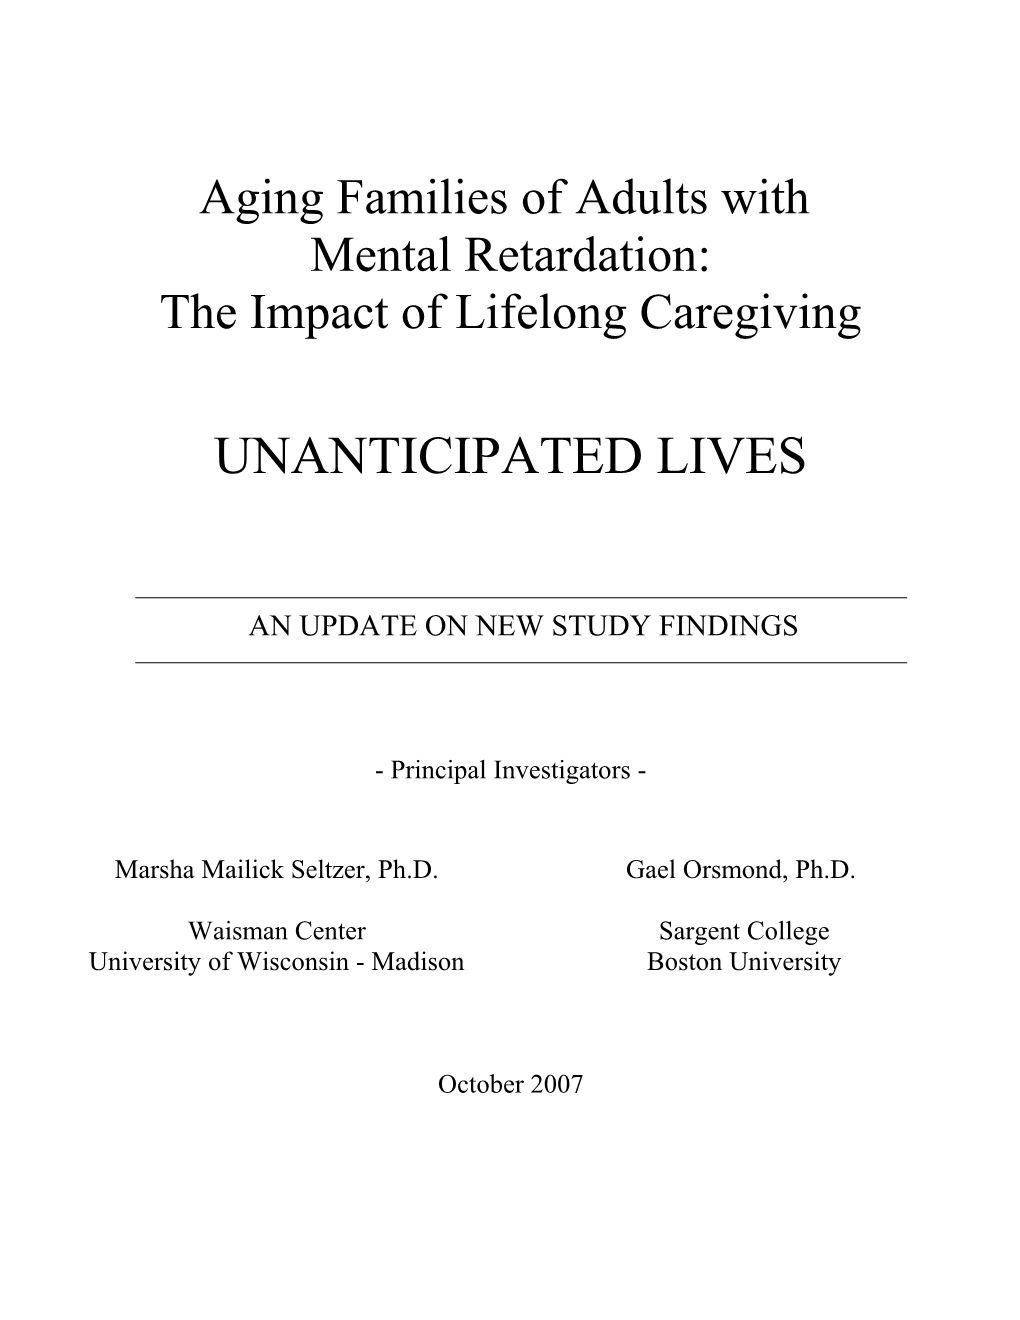 Aging Families of Adults With